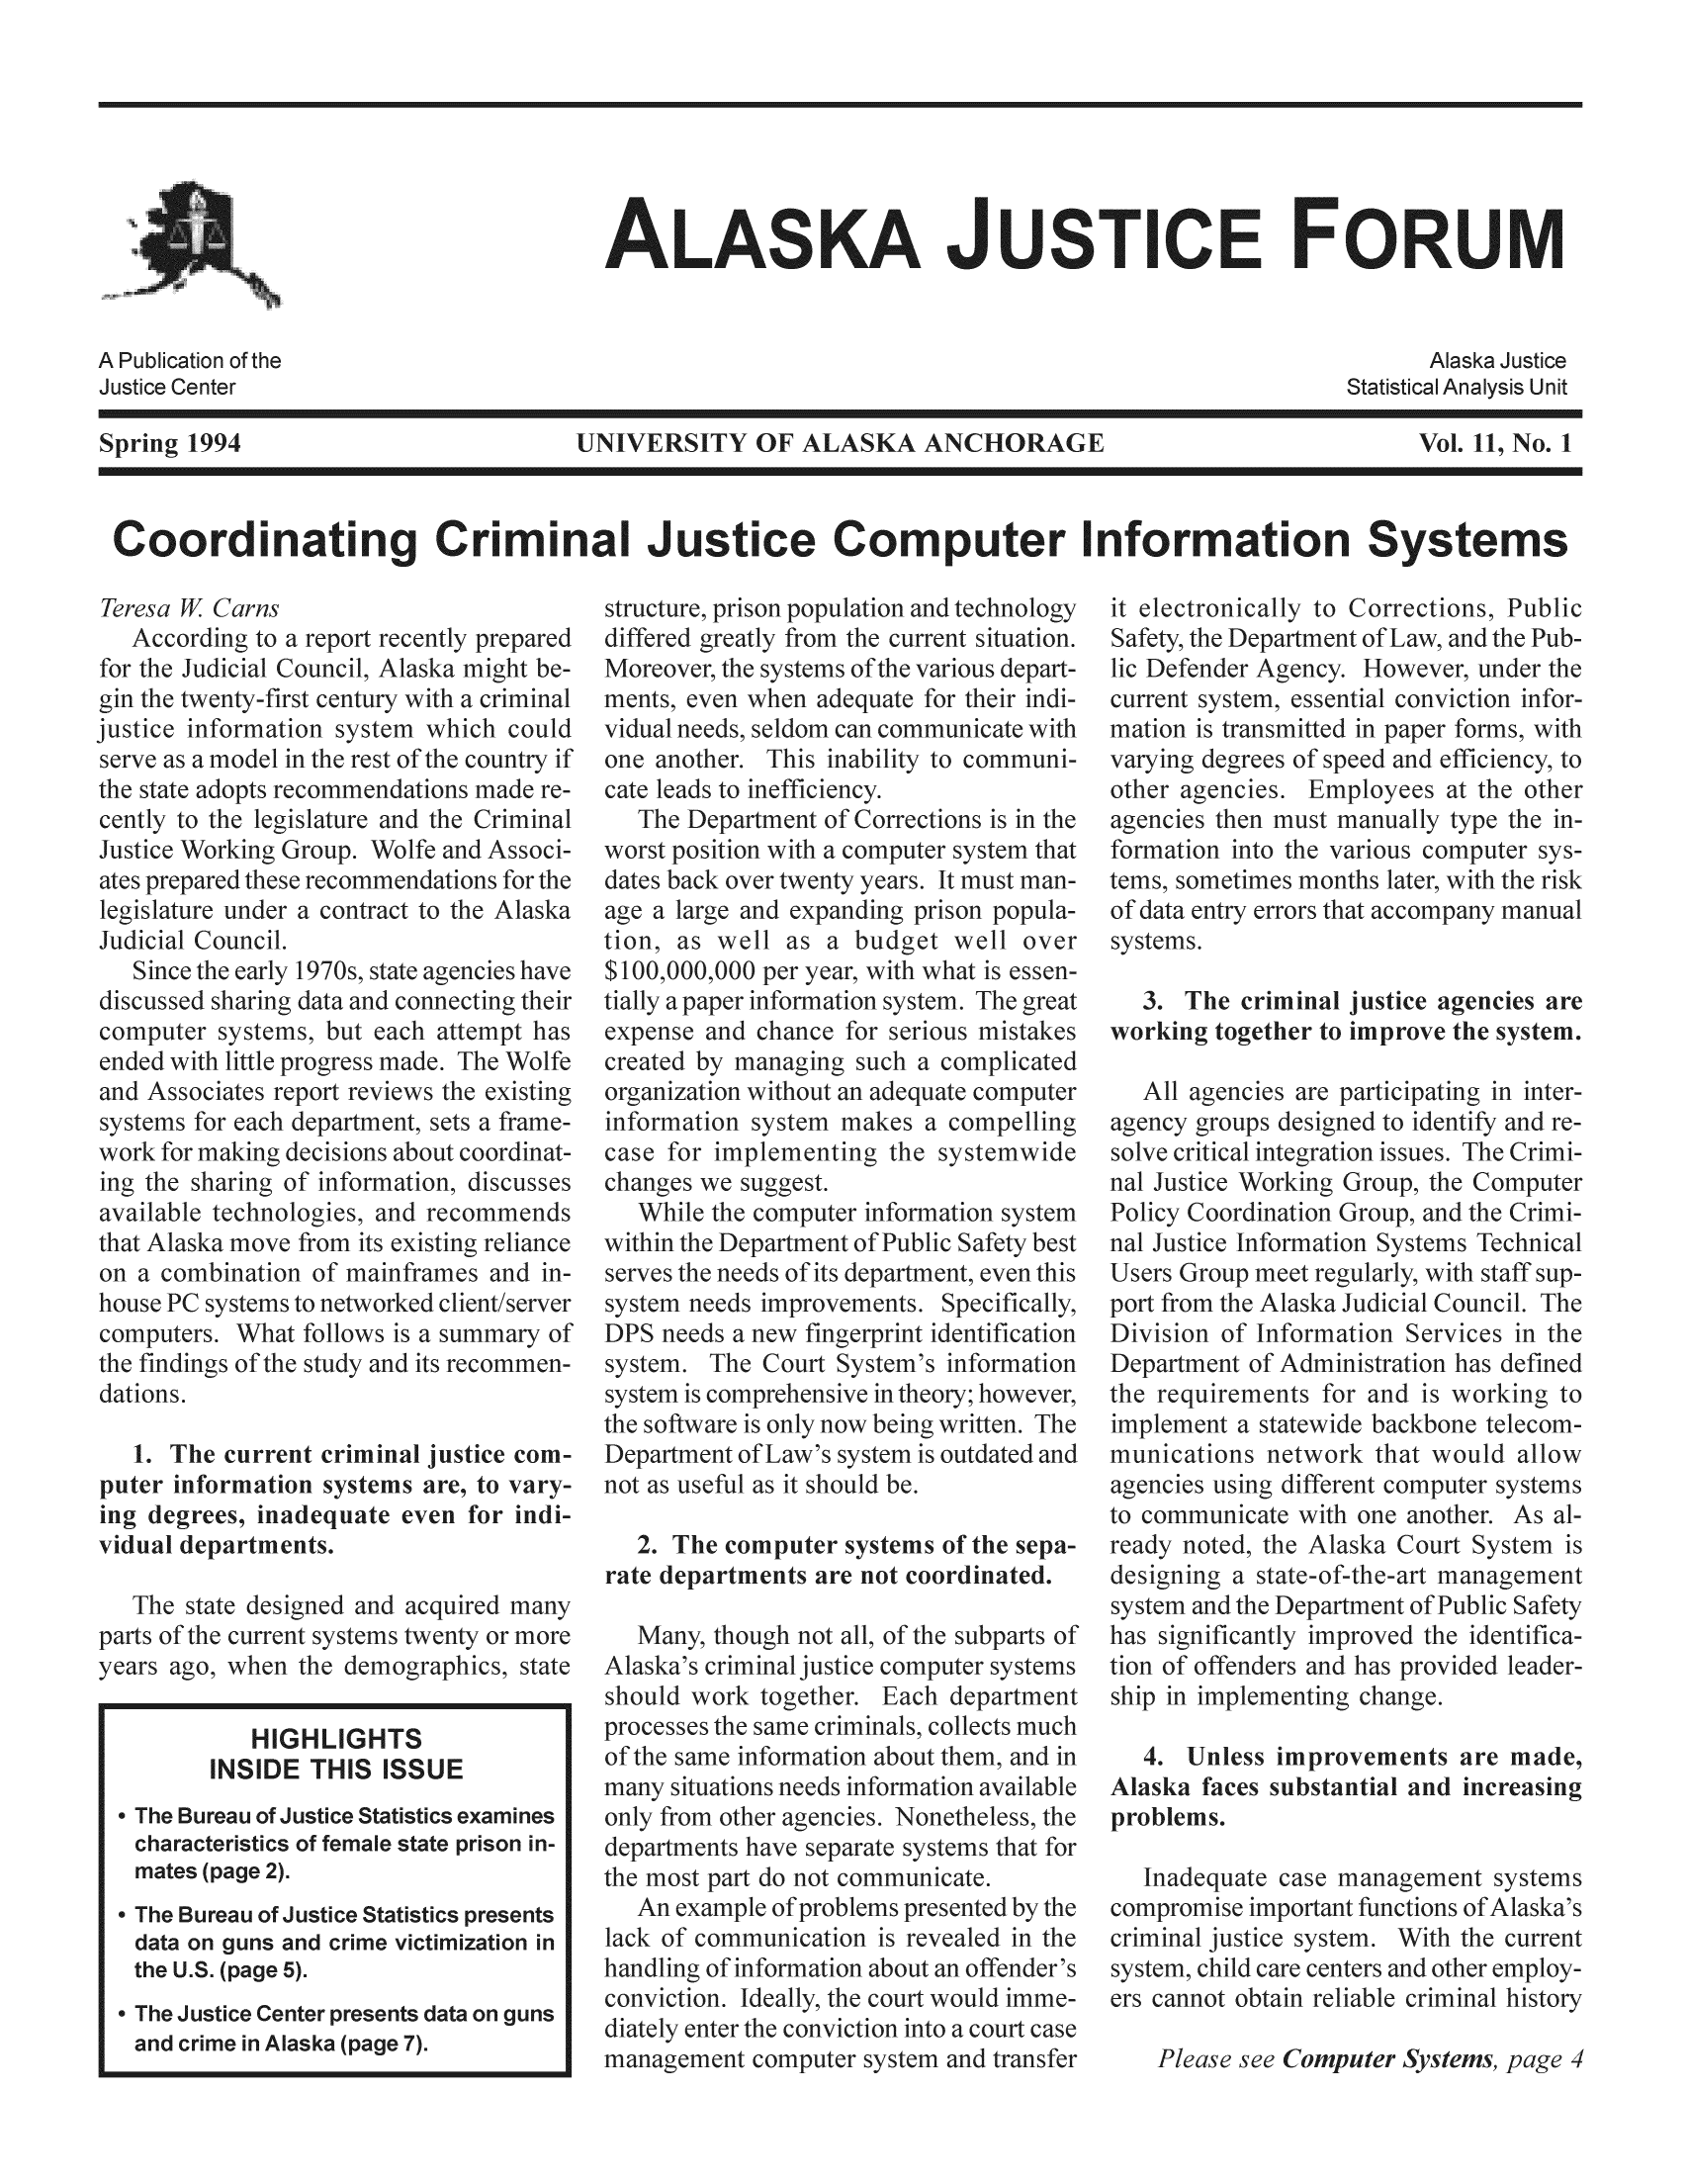 handle is hein.journals/aljufor11 and id is 1 raw text is: ALASKA JUSTICE FORUMSpring 1994UNIVERSITY OF ALASKA ANCHORAG]Vol. 11, No. 1Coordinating Criminal Justice Computer Information SystemsAure, prison popt.red greatly fromeover the sfstemapu;for thKpanding prison poptjusticeire, toi paper infcaptfor impl3. The crimvorking togeth(emmakes a compeienting the system,St.puter information spartment of peds of its depaummary of DPS1. The current crimlputer information systeing degrees, inadequat,v*dual departments.The state designed anparts of the current systerryears ago, when the demographics, stateHIGHLIGHTSINSIDE THIS ISSUE The Bureau of Justice Statistics examinescharacteristics of female state prison in-mates (page 2). The Bureau of Justice Statistics presentsdata on guns and crime victimization inthe U.S. (page 5). The Justice Center presents data on gunsand crime in Alaska (page 7).the software is only icom-   Department of Law'sSafe)rovements. Specifi,fingerprint identificport frtheof2. The computer systems of the sepate departments are not coordinated.)f the subparts ofomputer systemsiple of prandlin of inffgroupsivision of Inffepartment of Artoustice agenciesimprove the systcparticipcrformation Smeet regularlAlaska Judicaft sup- and the Department of Public Safeignificantly improved the identific)f offenders and has provided leaip in implementing d4. Unless improveJaska faces substantroblems.tsthe compromise important fuibout an offaputer system and transfeliuty prepaska miaht-first centurItes prepaSafeip. wolteepartment of1970s, statSincmputdedd As4)rk fopaper foJ and effiA specEmplprogrereport rh deparSdecisi(1,-P ;1-ska move ff)f mainfinpufinComputer Svstem,